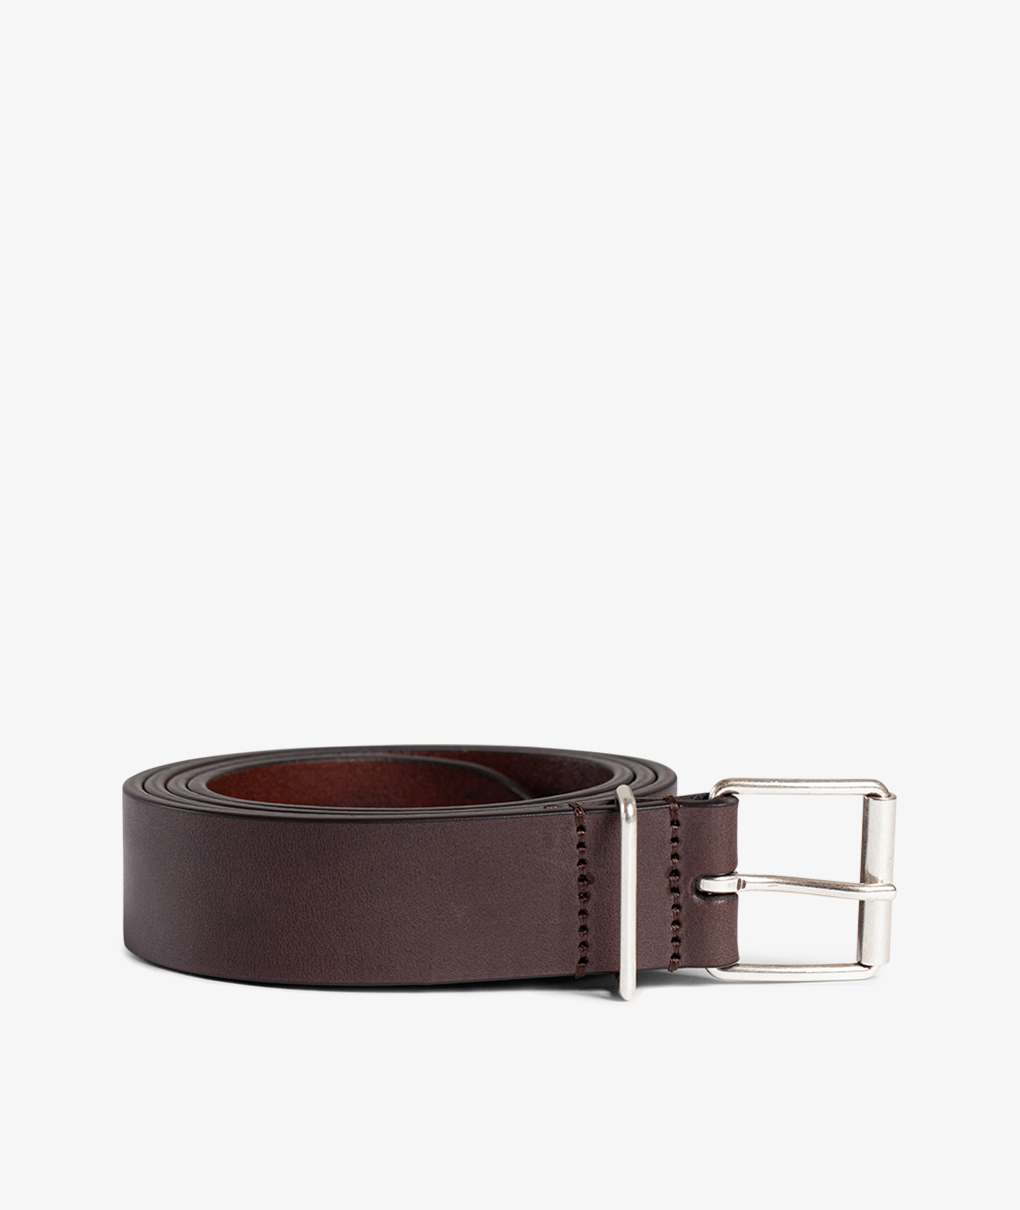 Norse Store  Shipping Worldwide - Anderson's Braided Leather Belt - Brown